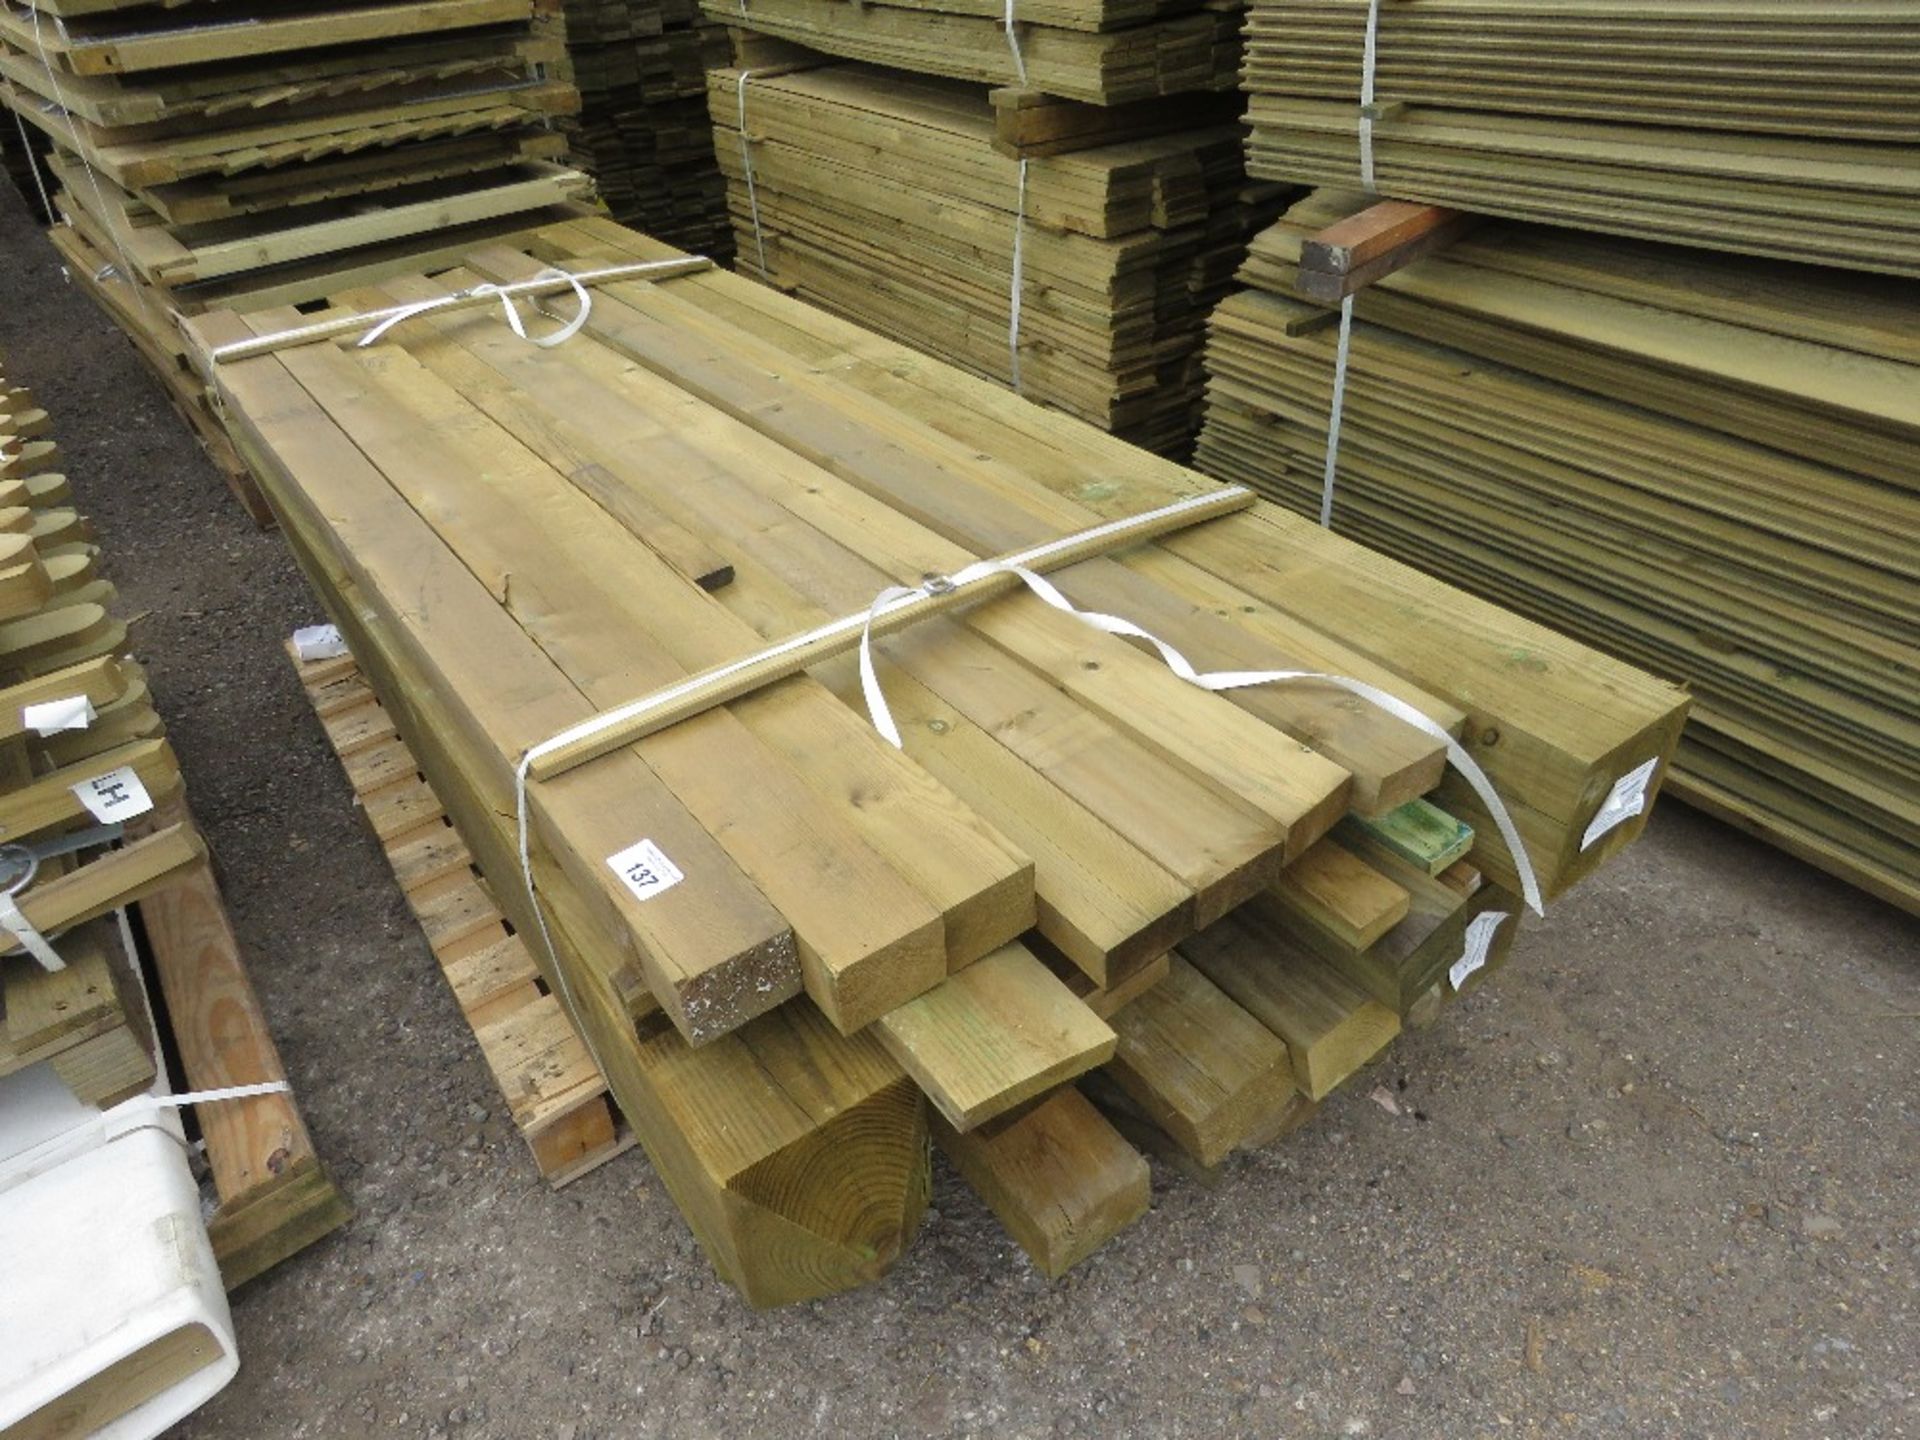 BUNDLE OF HEAVY DUTY GATE POSTS AND FENCING TIMBERS.